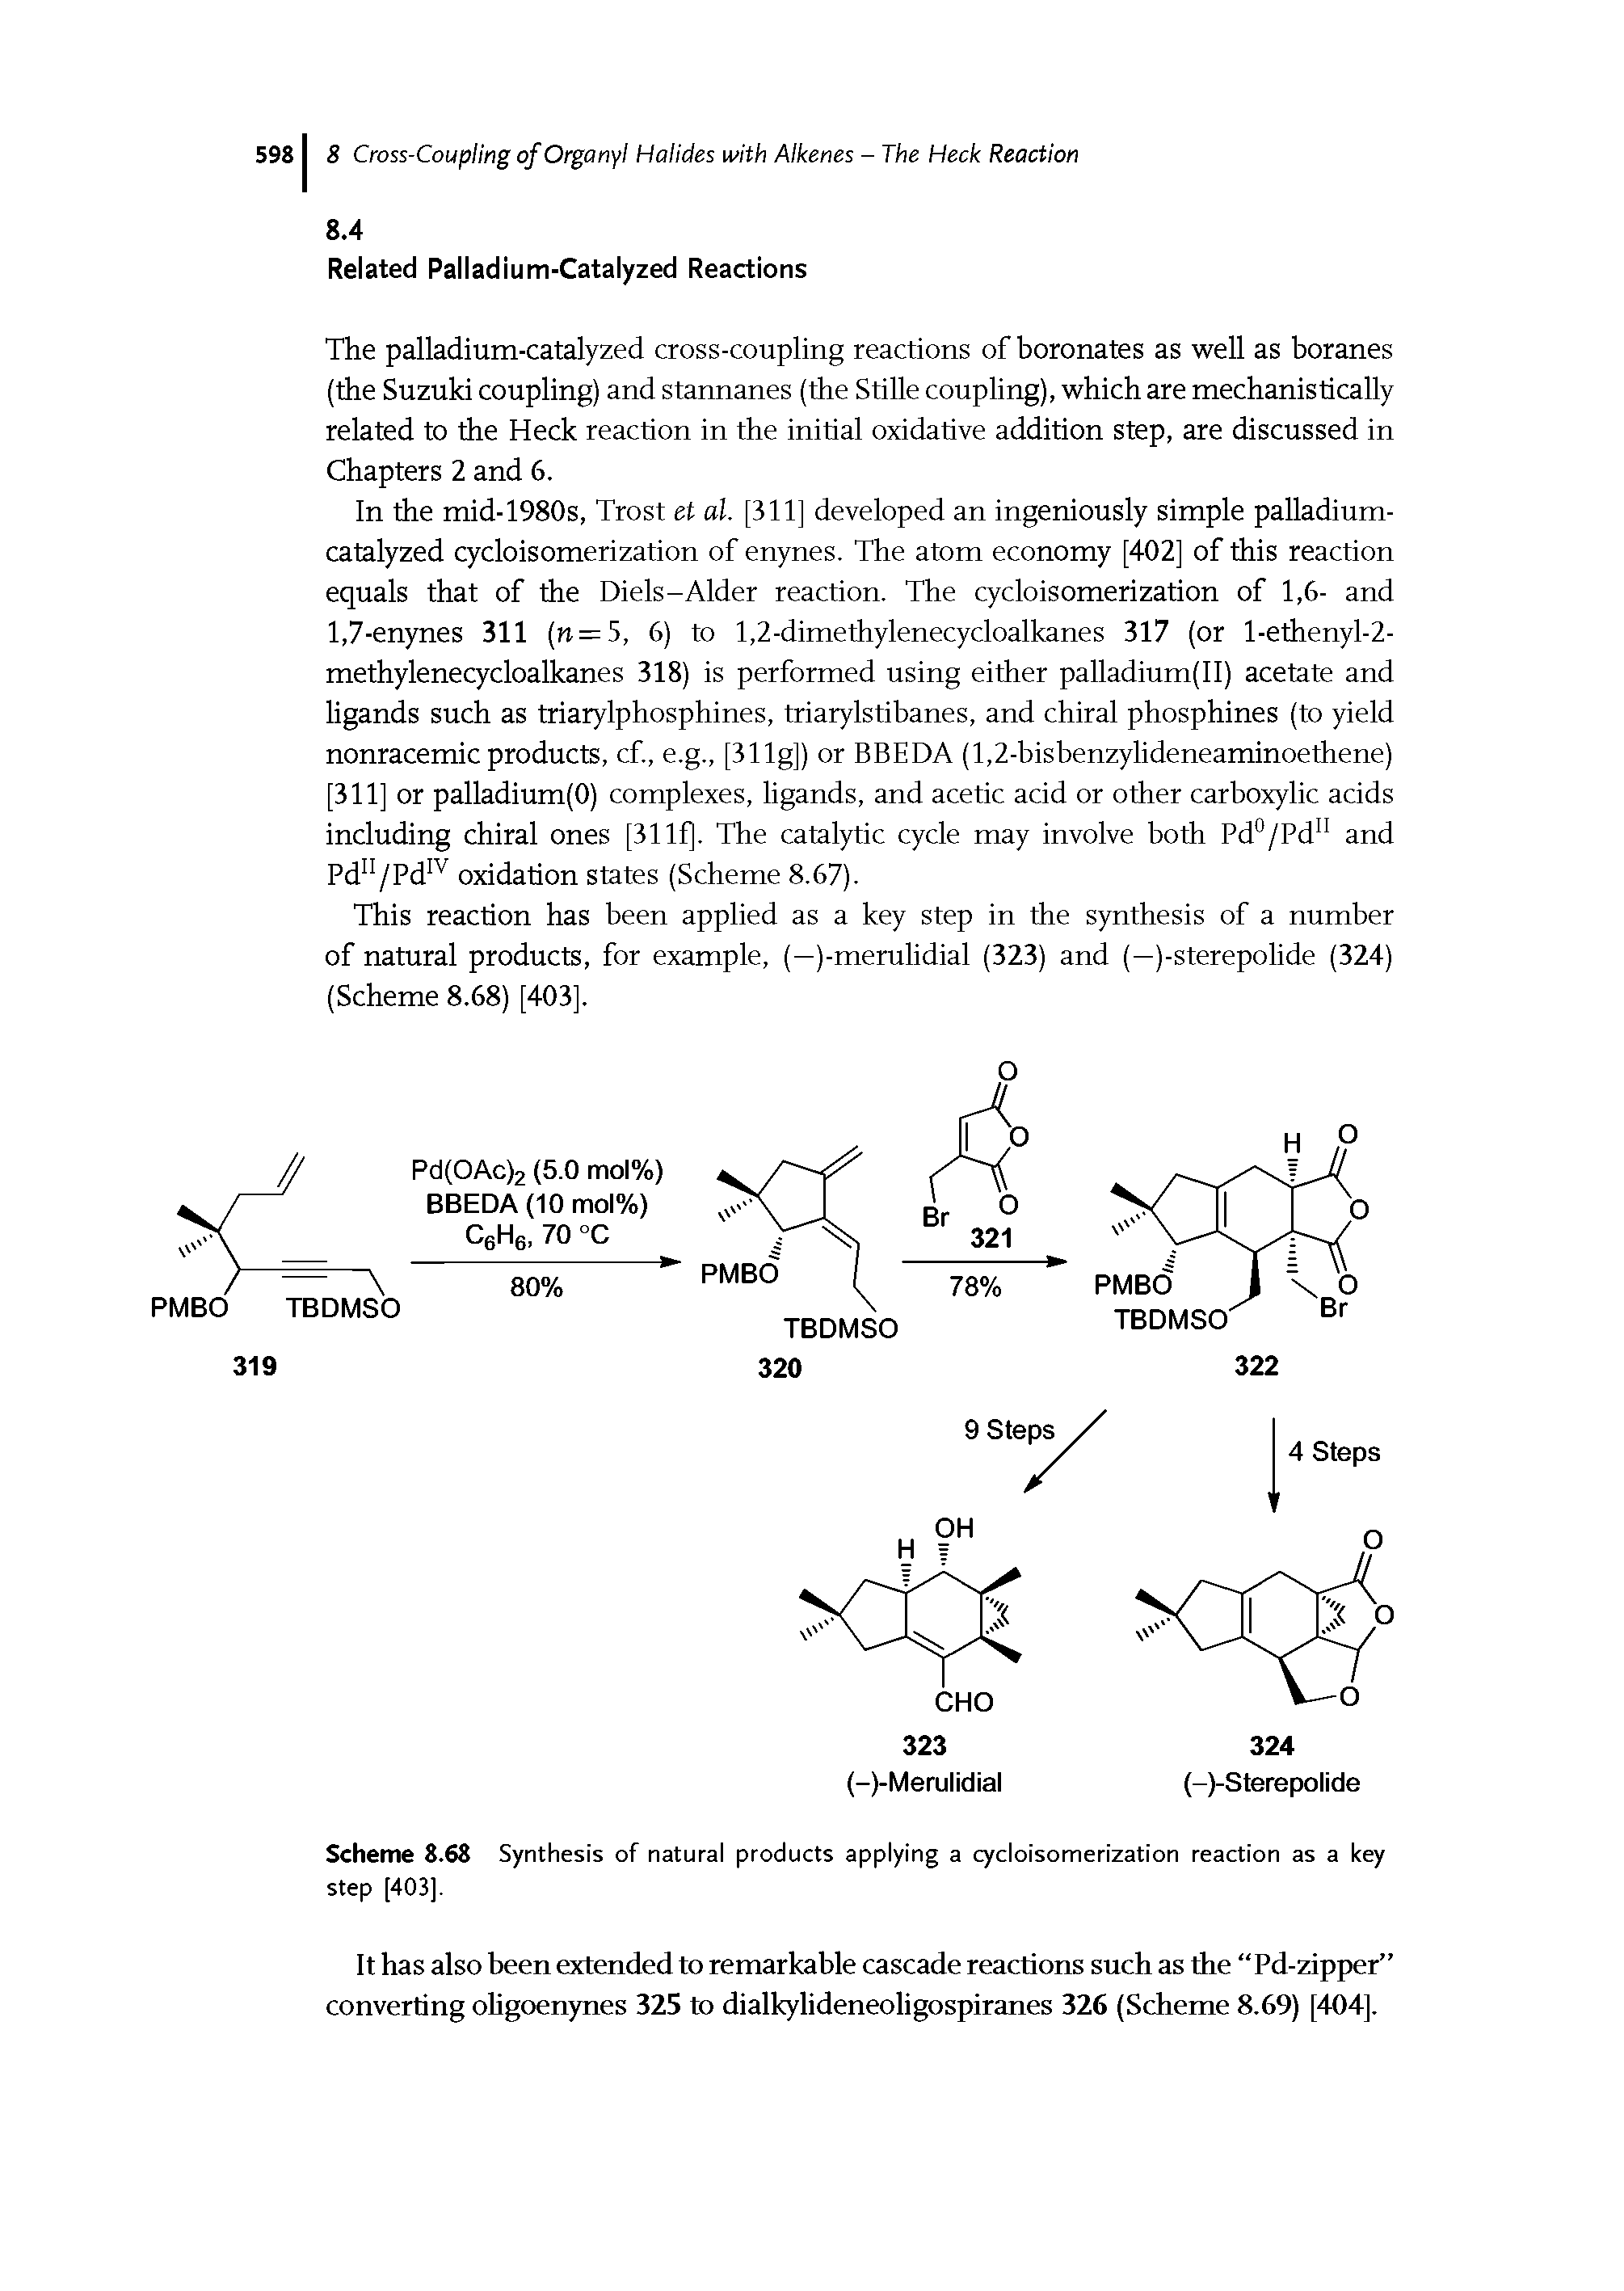 Scheme 8.68 Synthesis of natural products applying a cycloisomerization step [403]. reaction as a key...